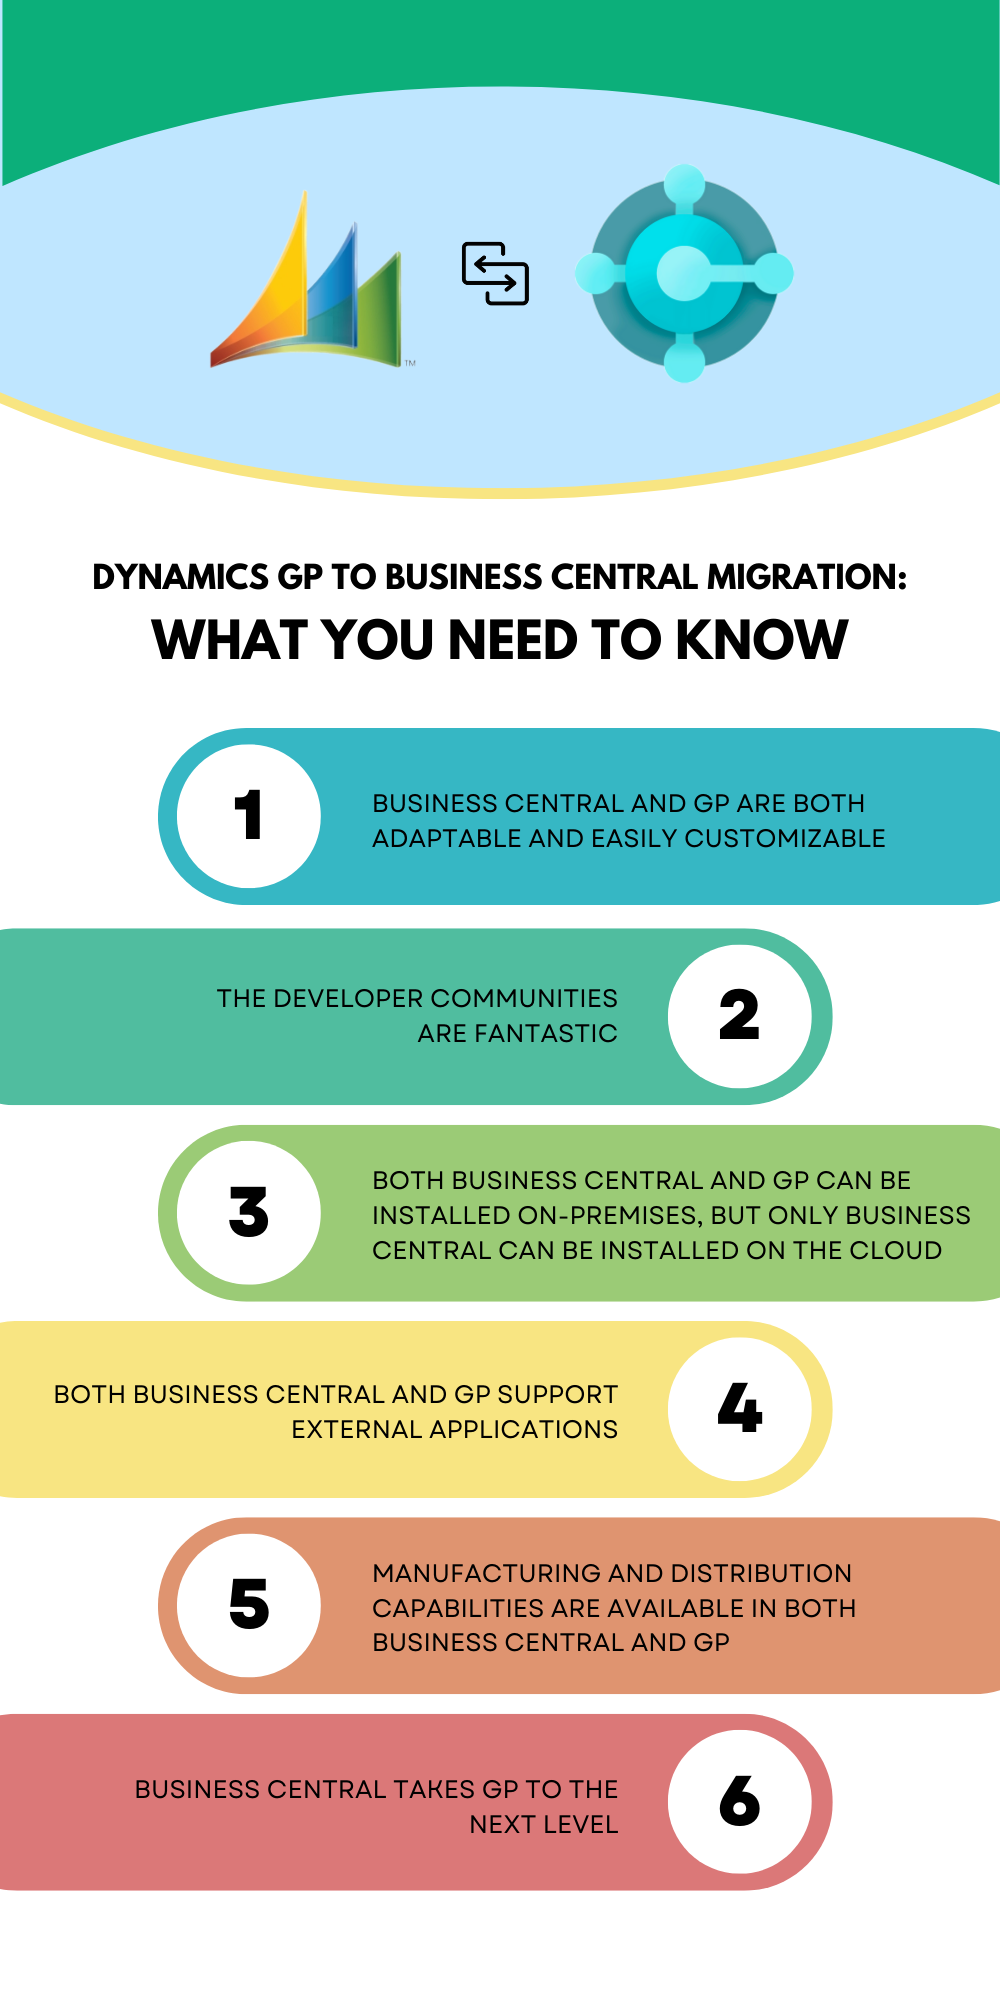 Dynamics GP to Business Central Migration